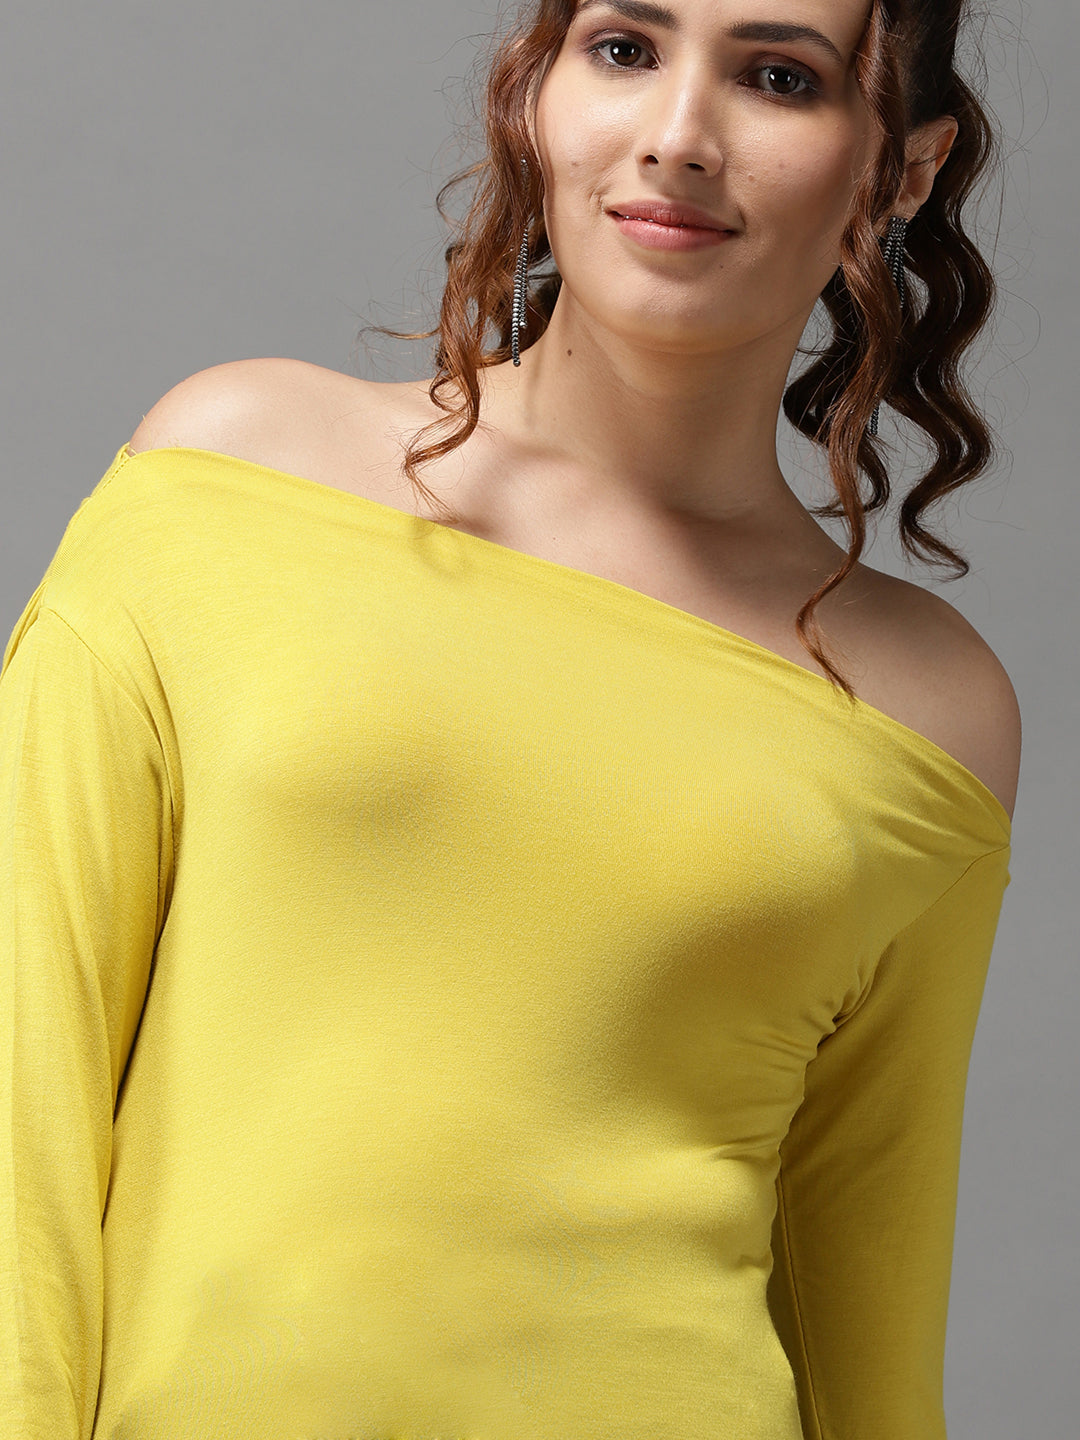 Women One Shoulder Solid Yellow Fitted Top